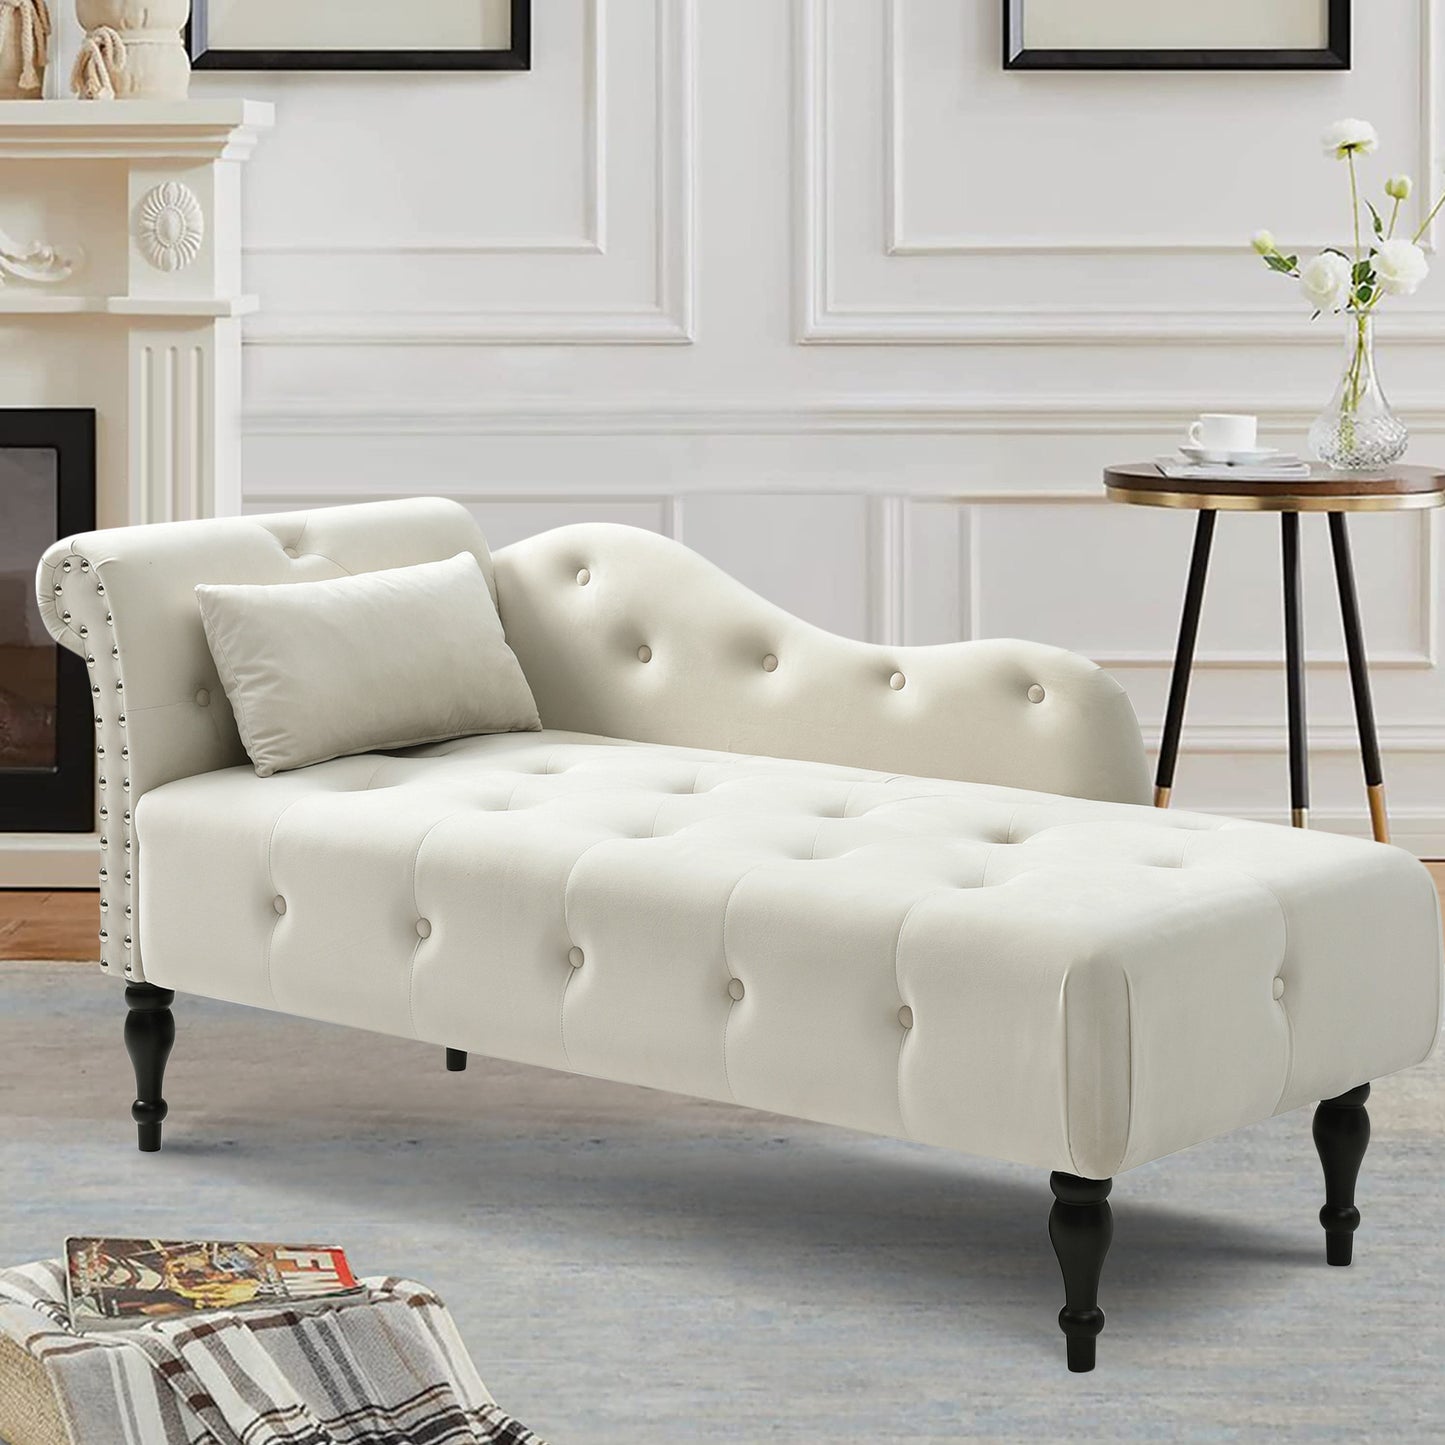 SYNGAR Modern Lounge Chaise Indoor, Leisure Sofa Accent Chair Upholstered Couch, Button Tufted Seat with Matching Accent Pillow, and Solid Wooden Legs